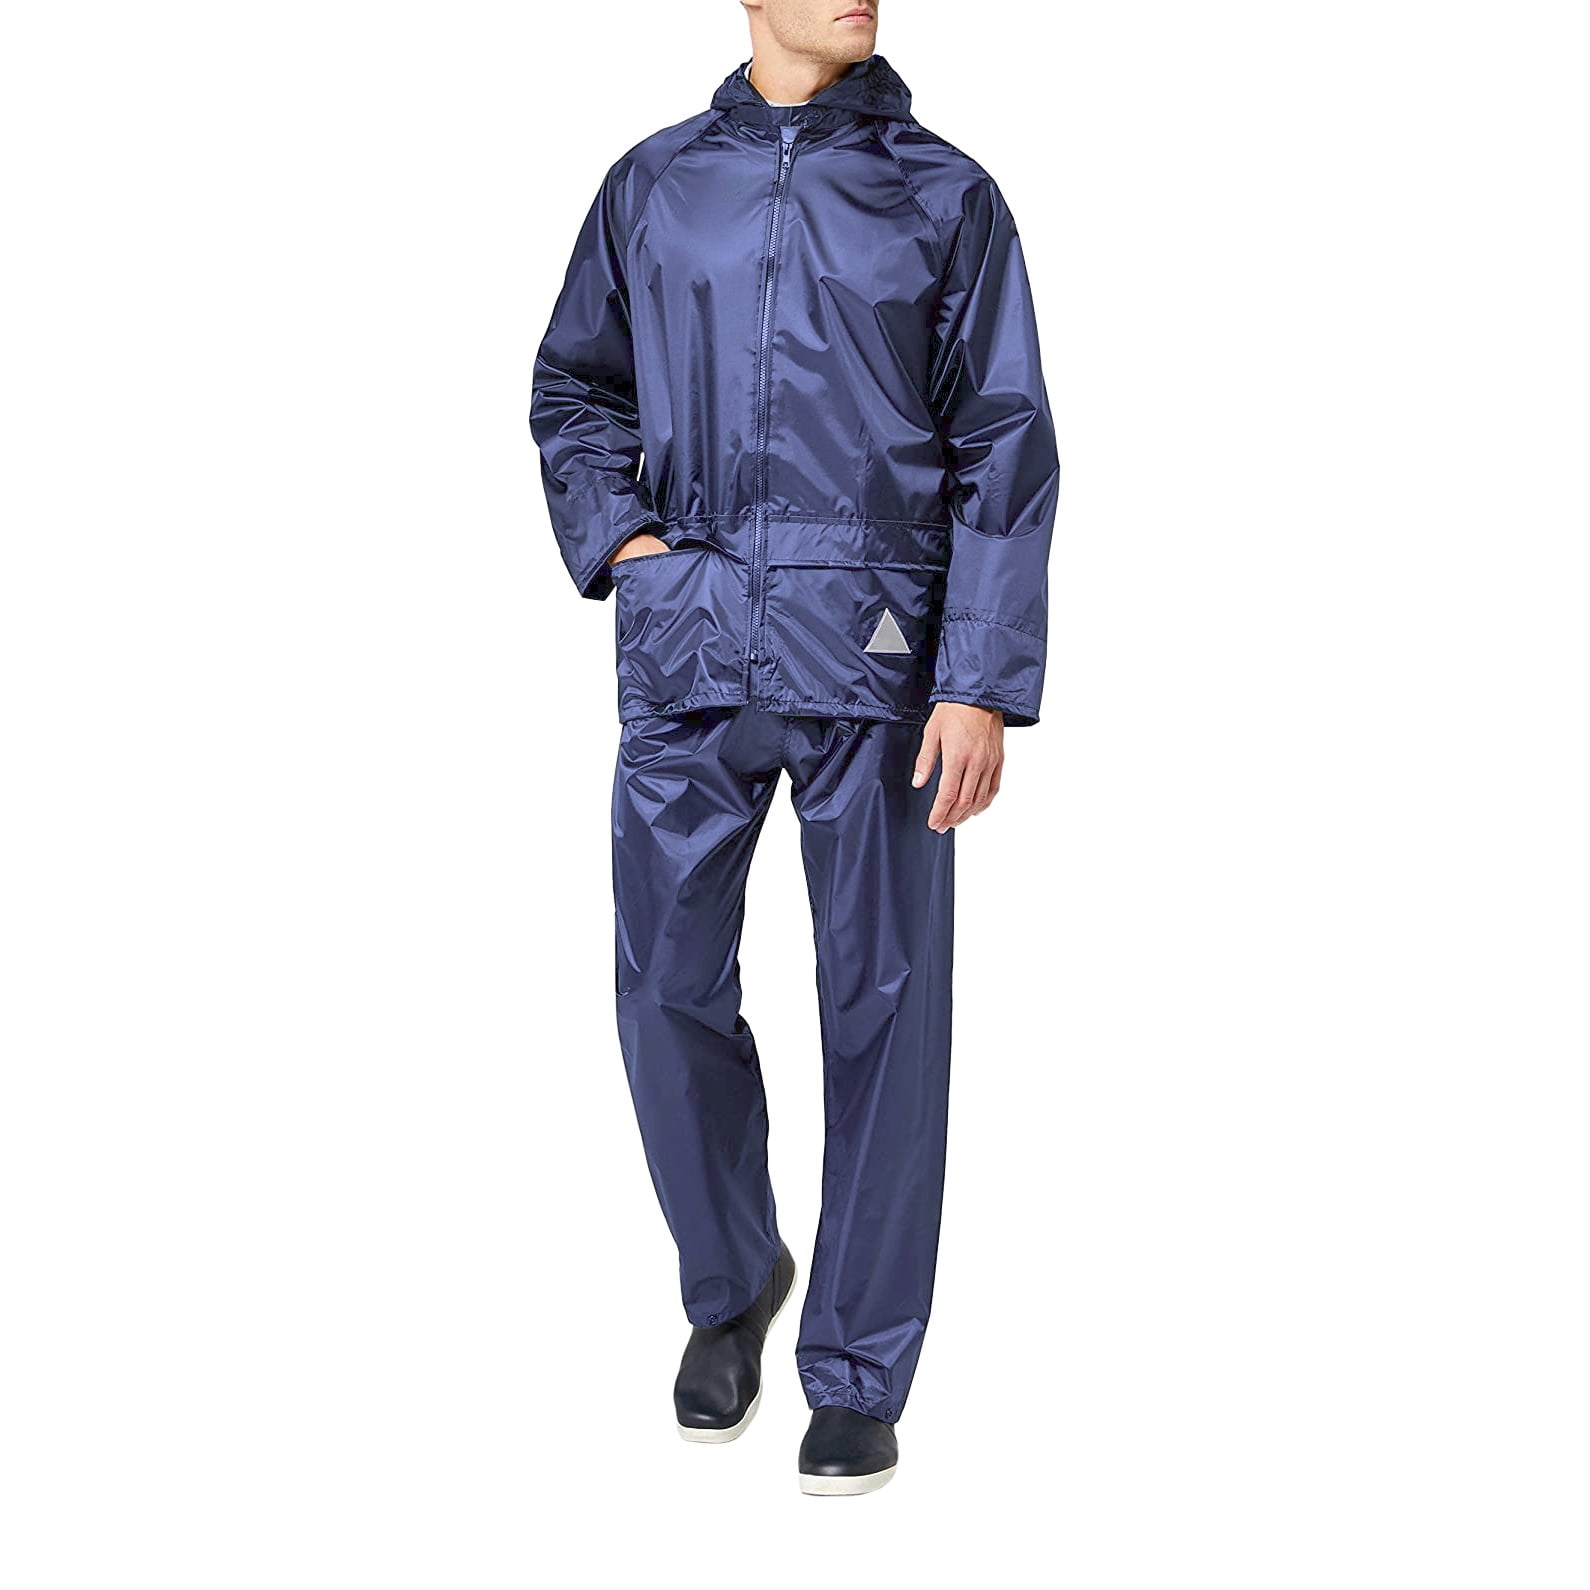 Details about   FROGG TOGGS ALL SPORTS RAIN SUIT MENS XX LARGE ROYAL BLUE AND BLACK NWT